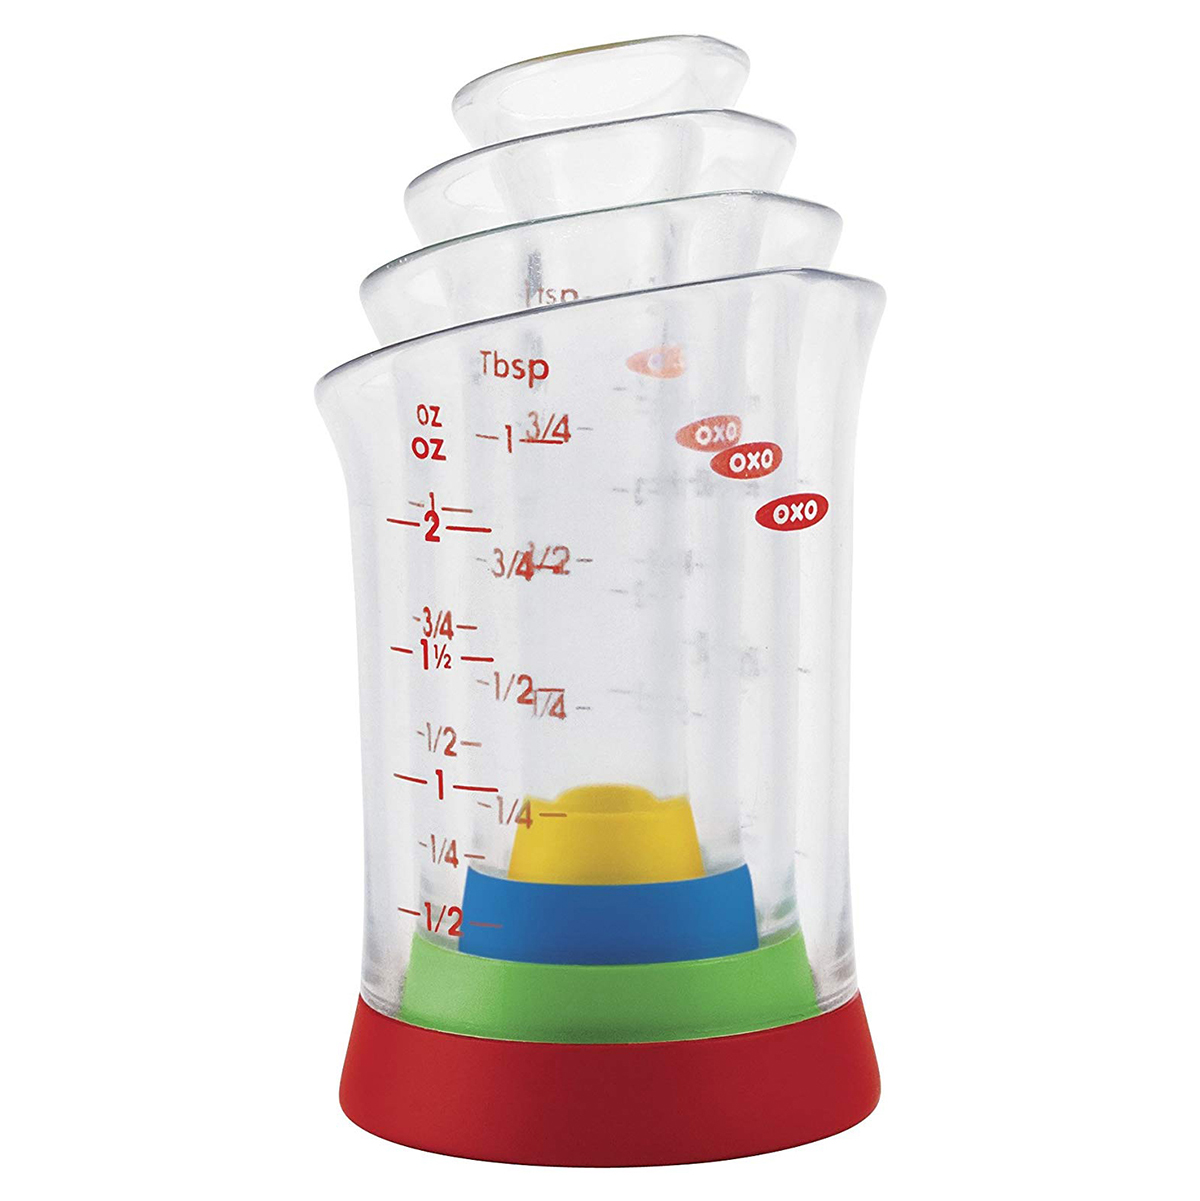 https://www.containerstore.com/catalogimages/426900/10085700-OXO-Beakers-Mini-VEN1.jpg